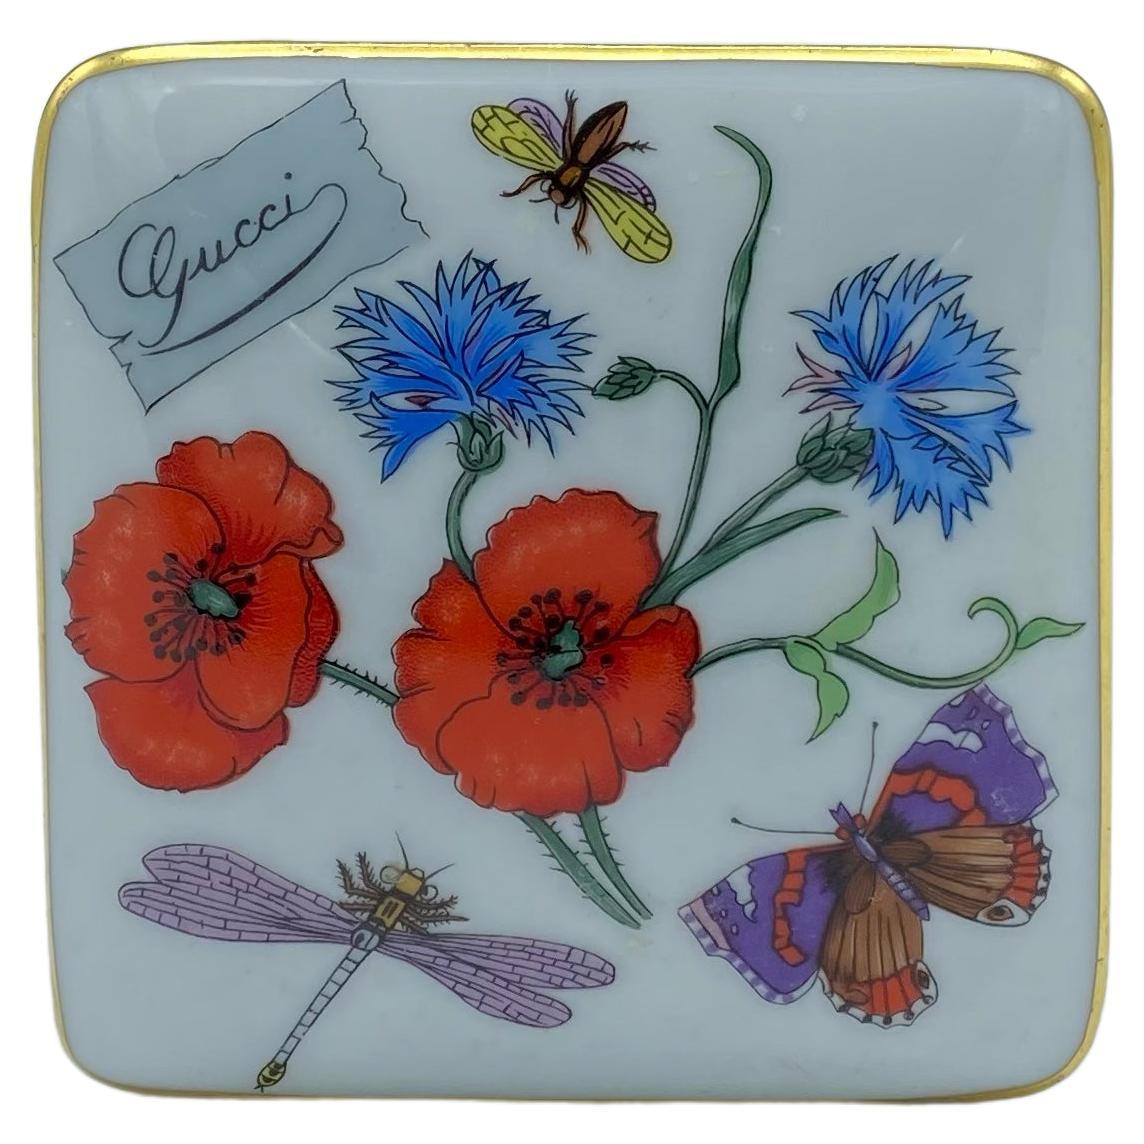 TheRealList presents: a stunning vintage Gucci porcelain box. This box features the classic Gucci 'flora' pattern which depicts wild flowers and insects. From the 1980s this item was produced by Bernardaud Limoges for Gucci. This porcelain